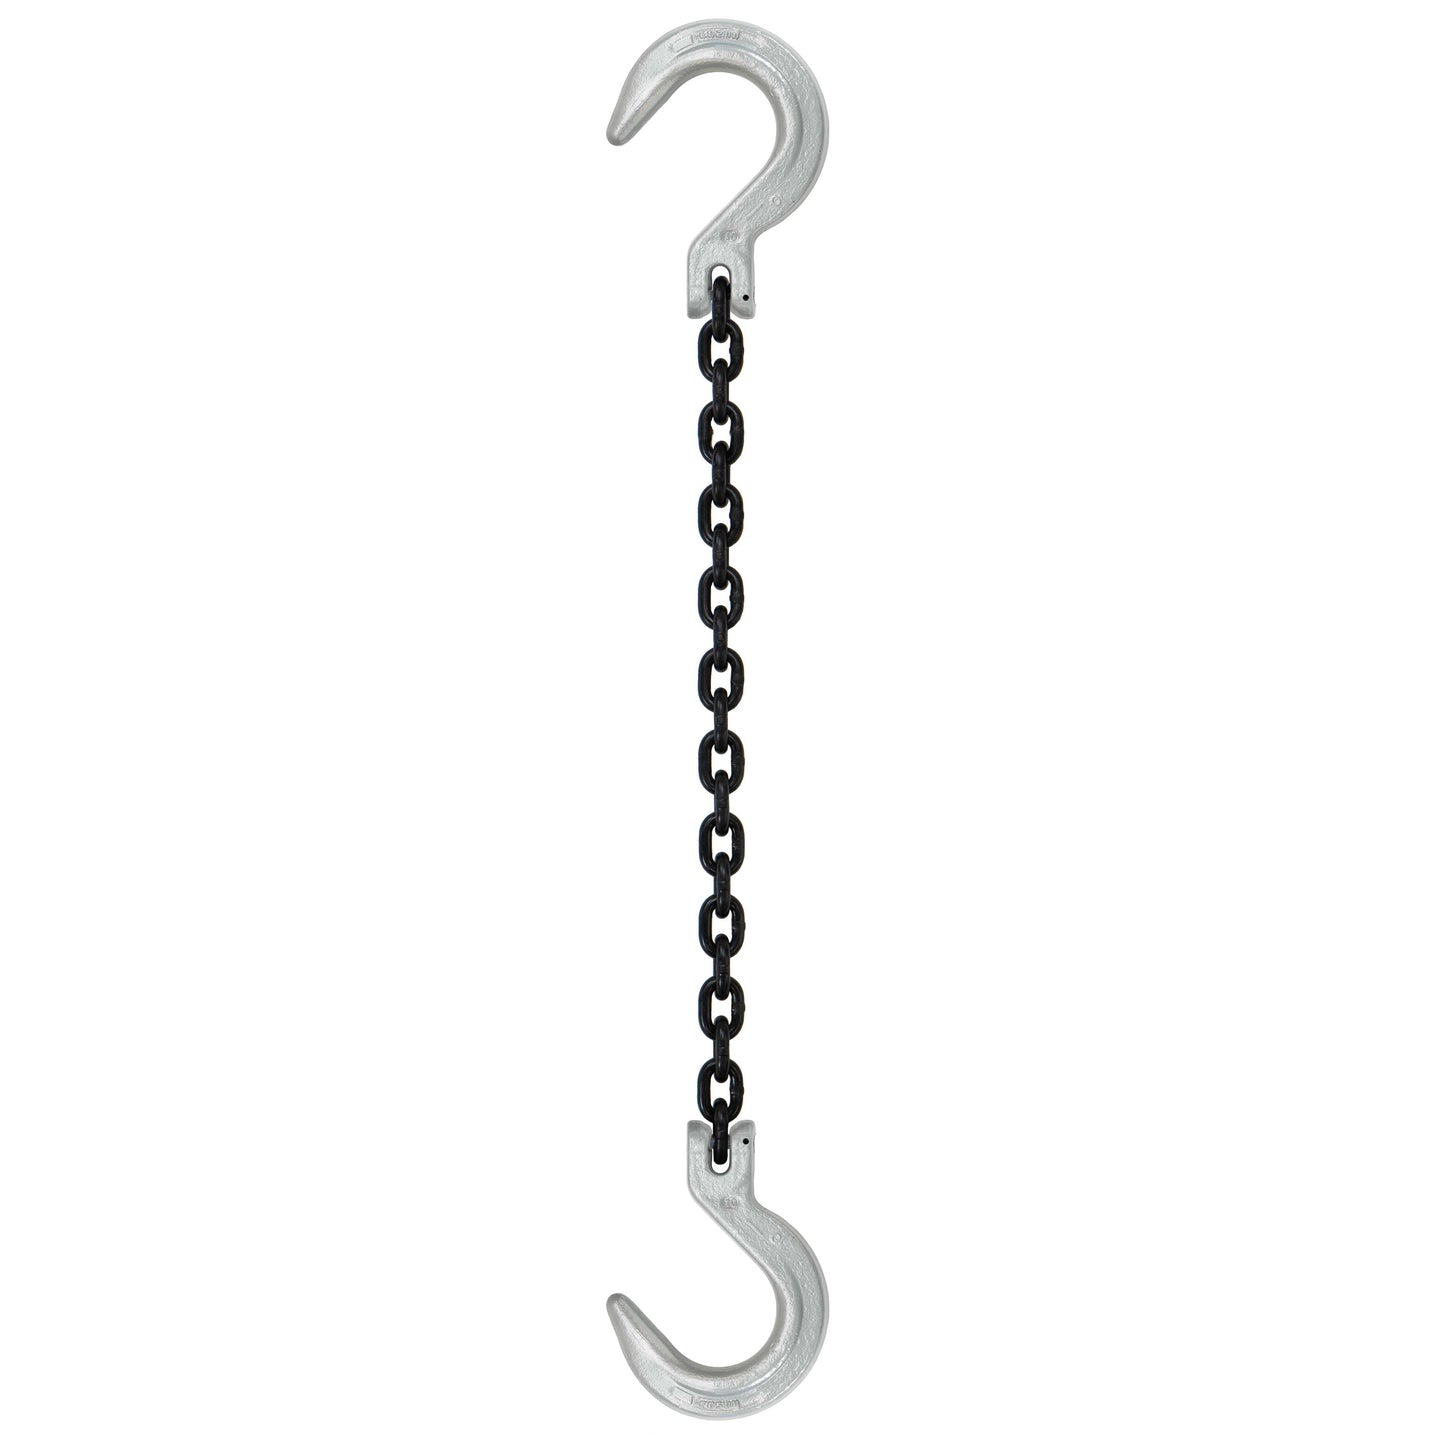 516 inch x 18 foot Domestic Single Leg Chain Sling w Crosby Foundry & Foundry Hooks Grade 100 image 1 of 2